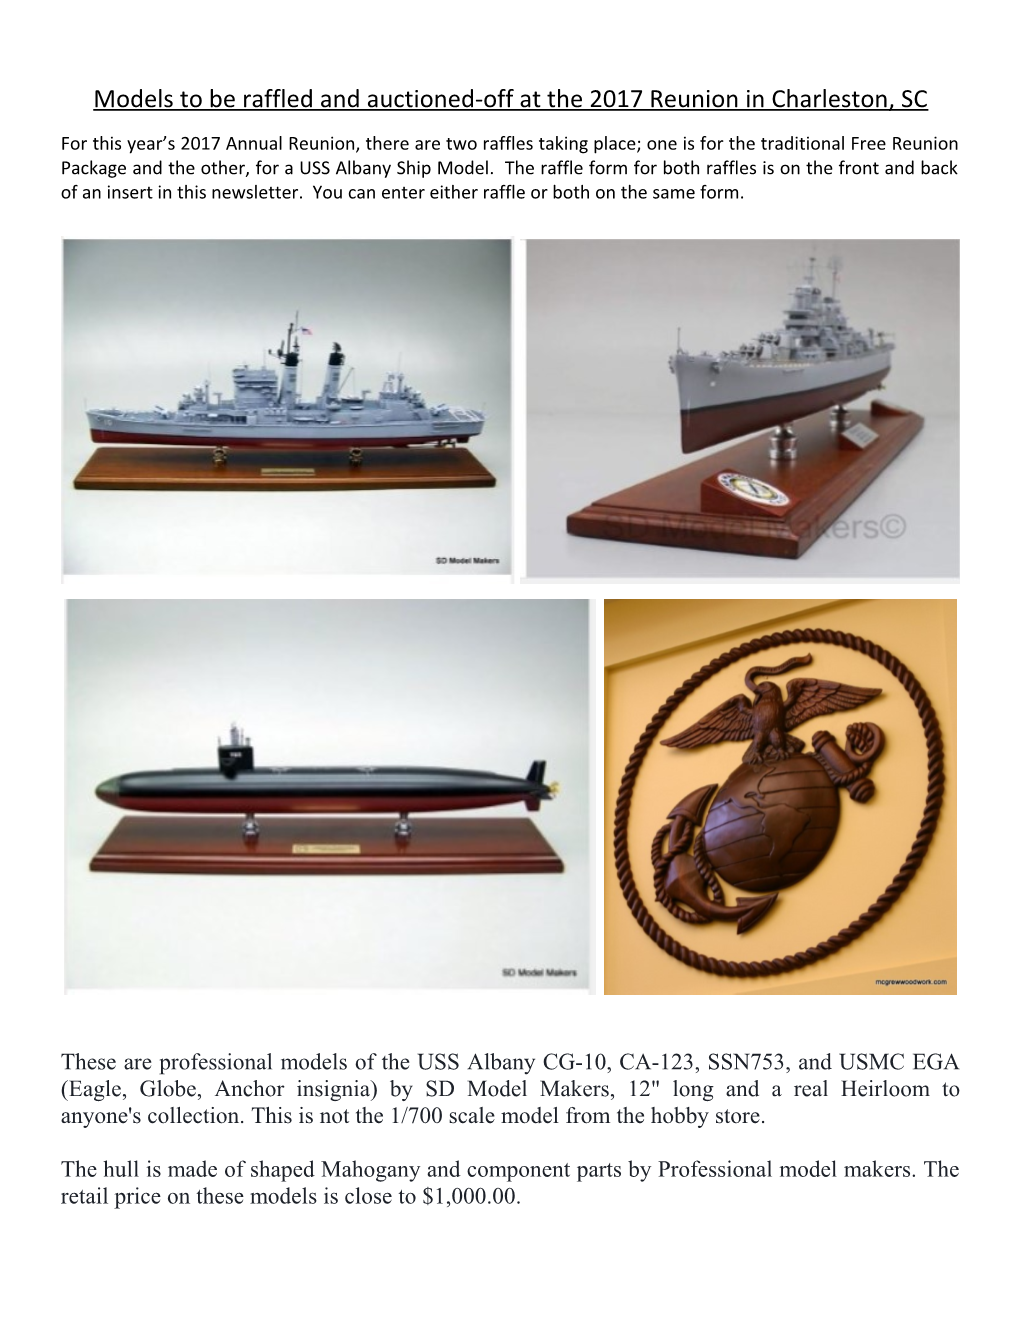 Models to Be Raffled and Auctioned-Off at the 2017 Reunion in Charleston, SC